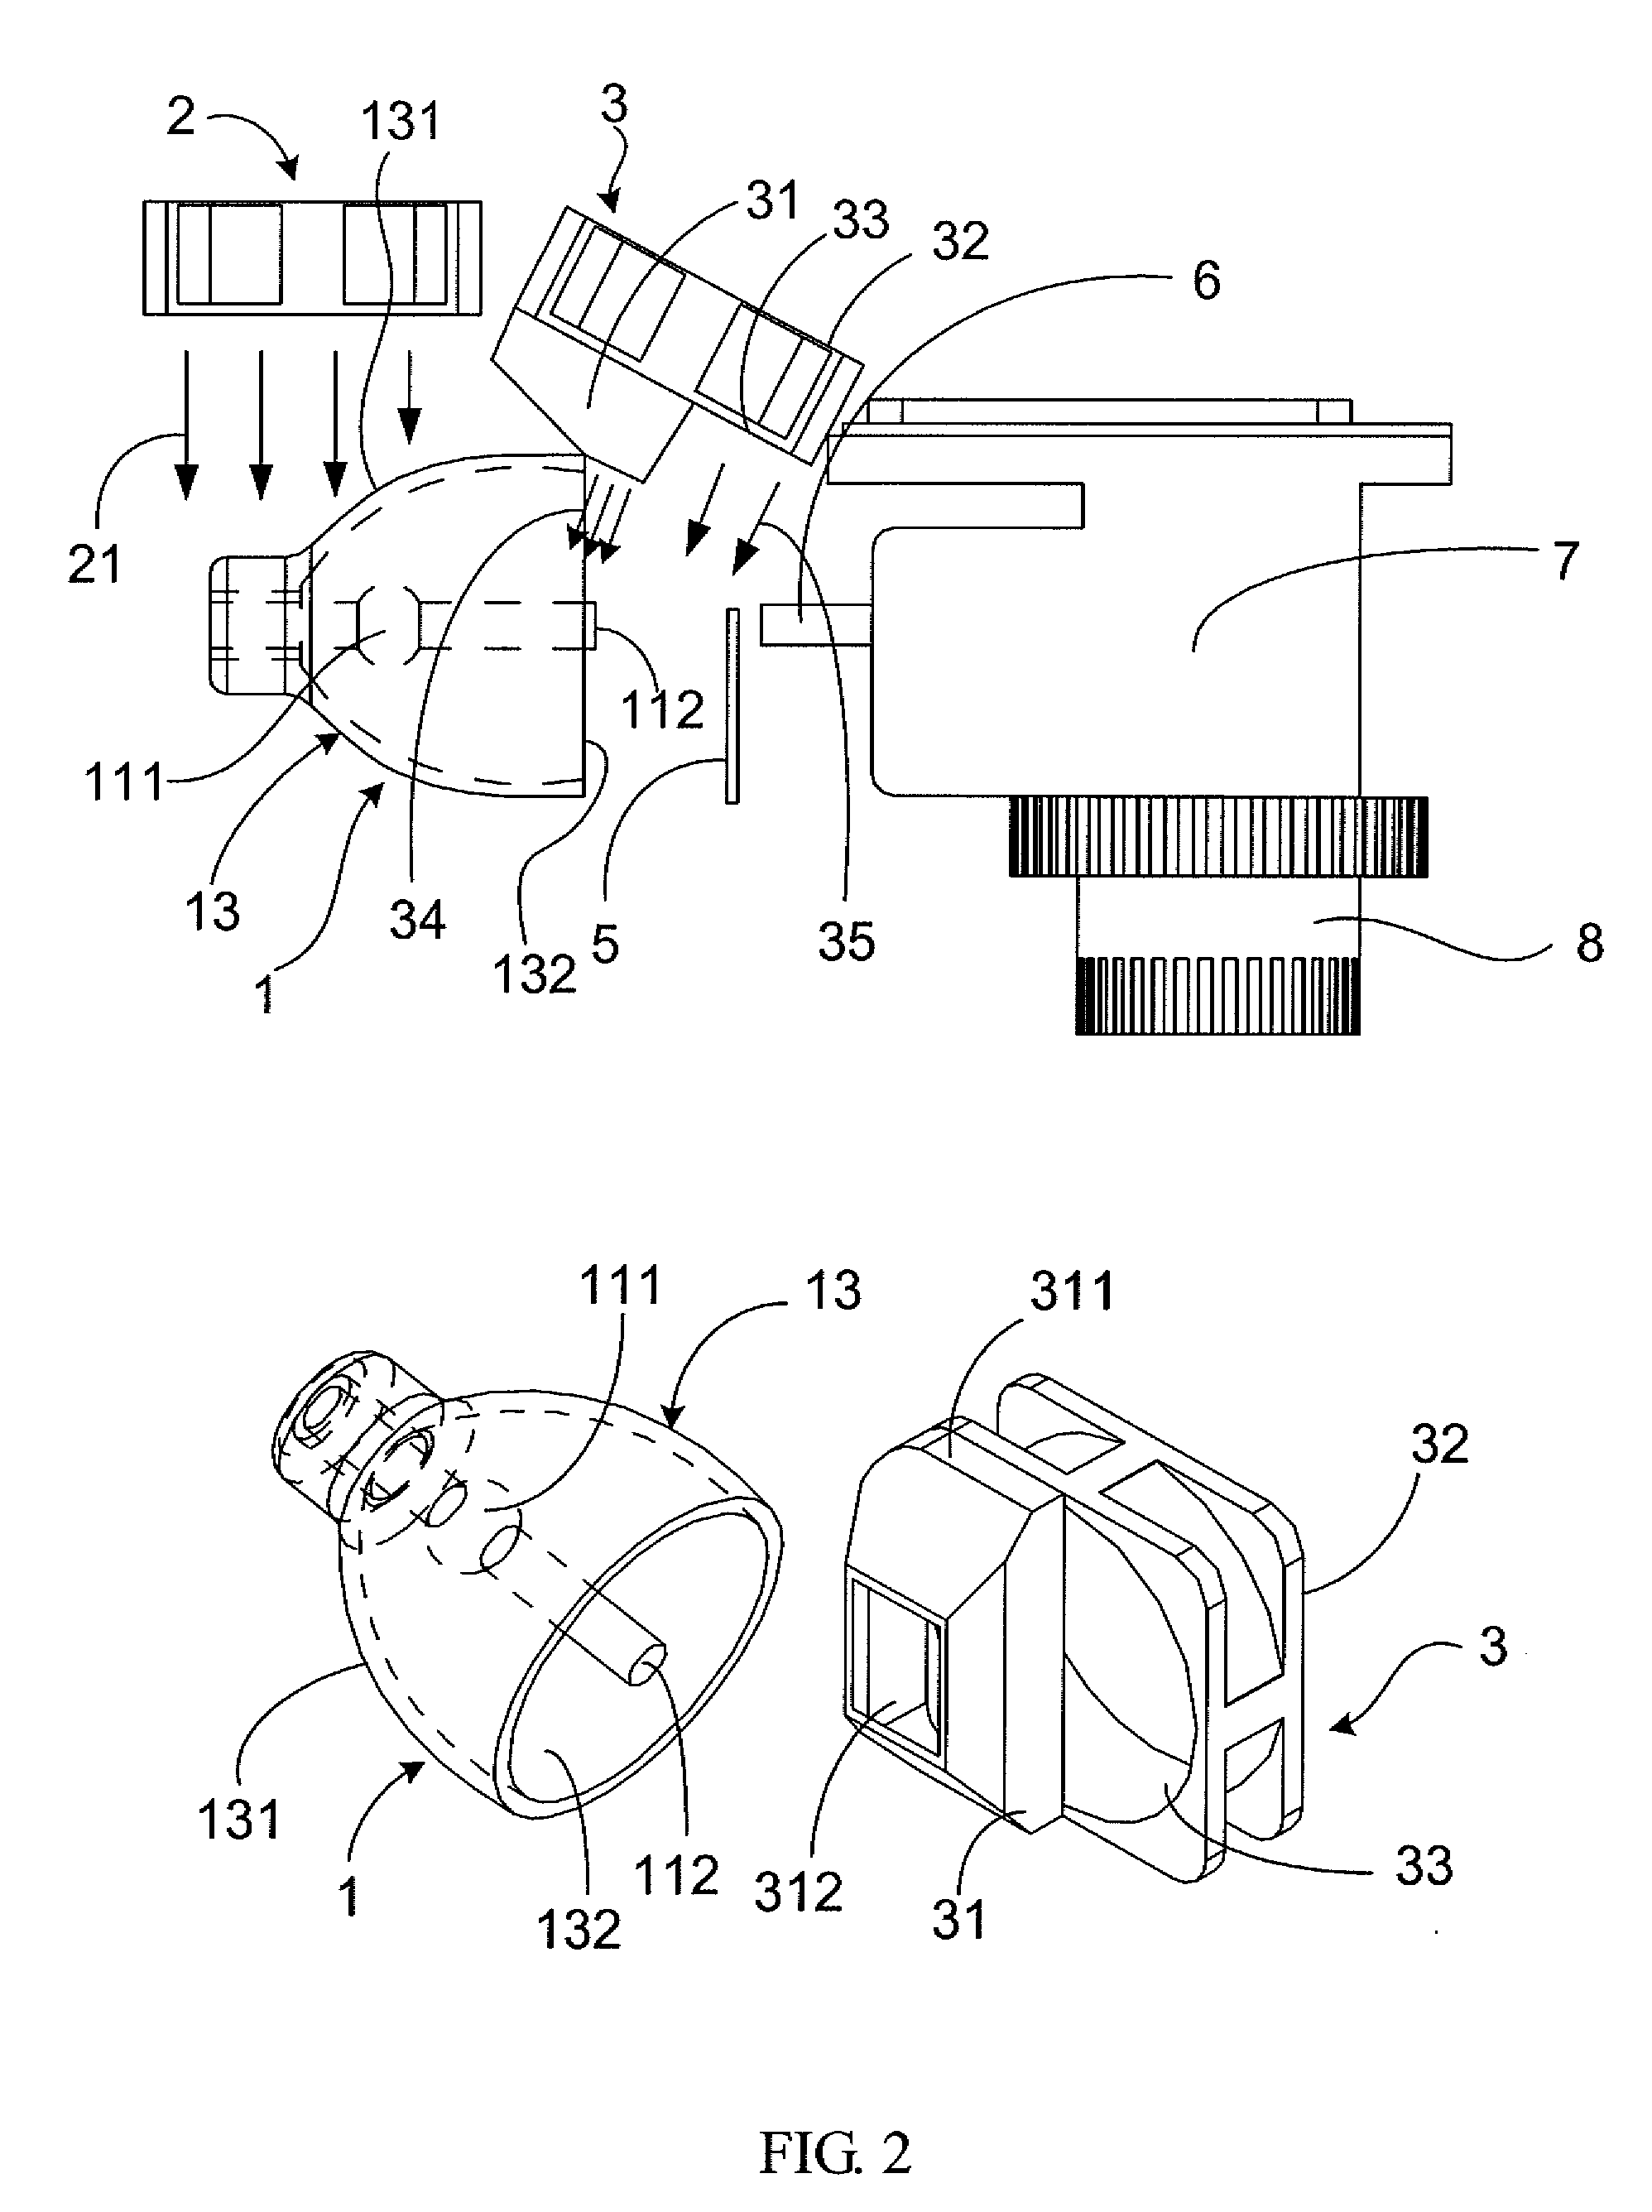 Cooling device for use with a projection apparatus